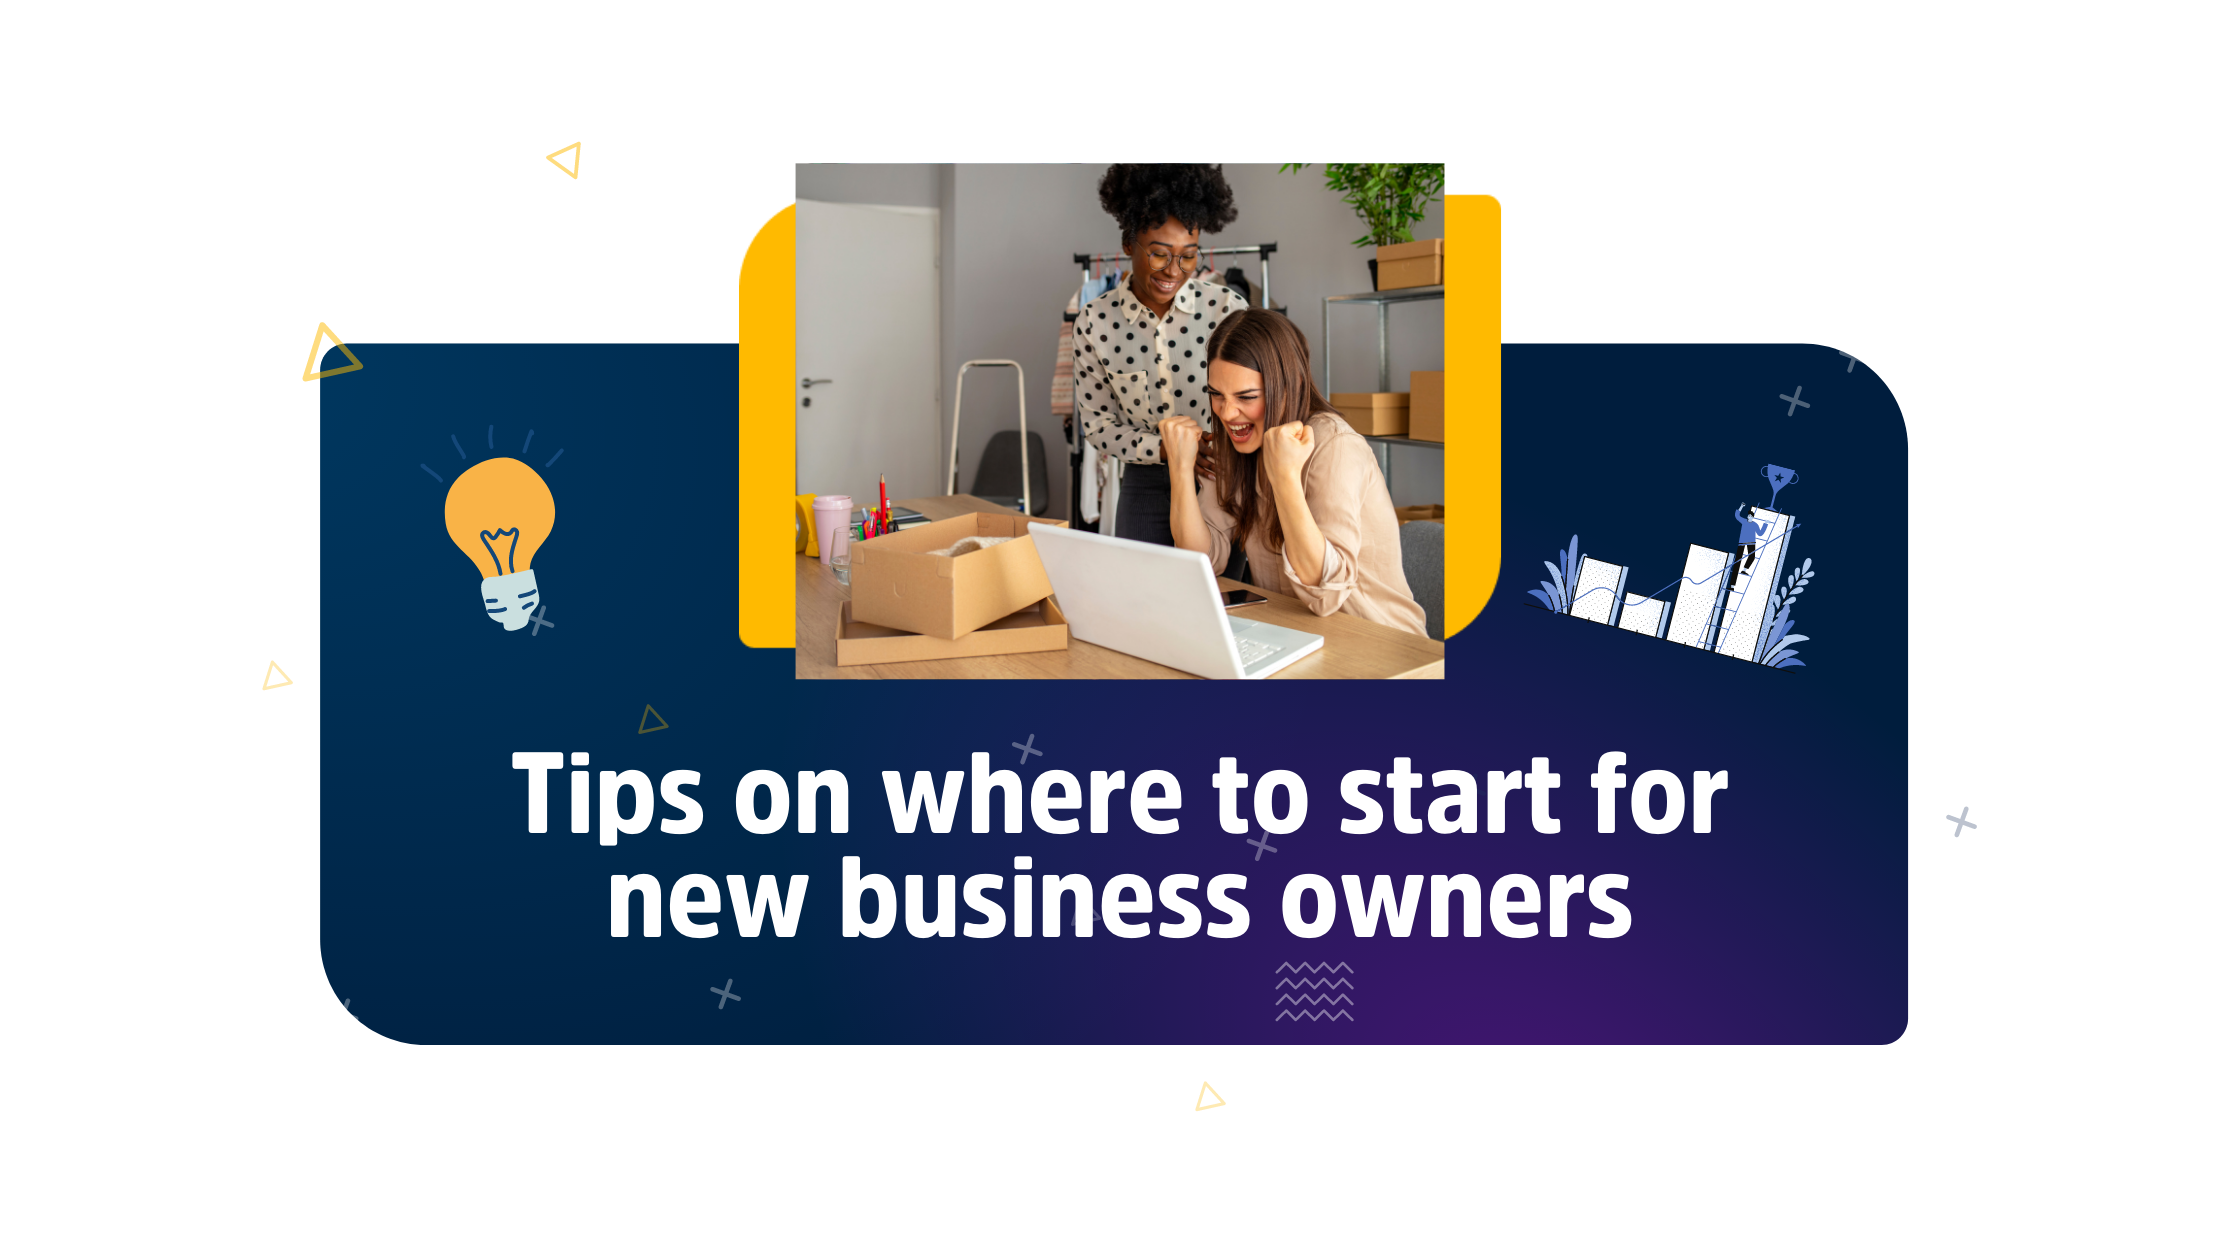 Started a business and don't know what's next? Here's some steps to take!